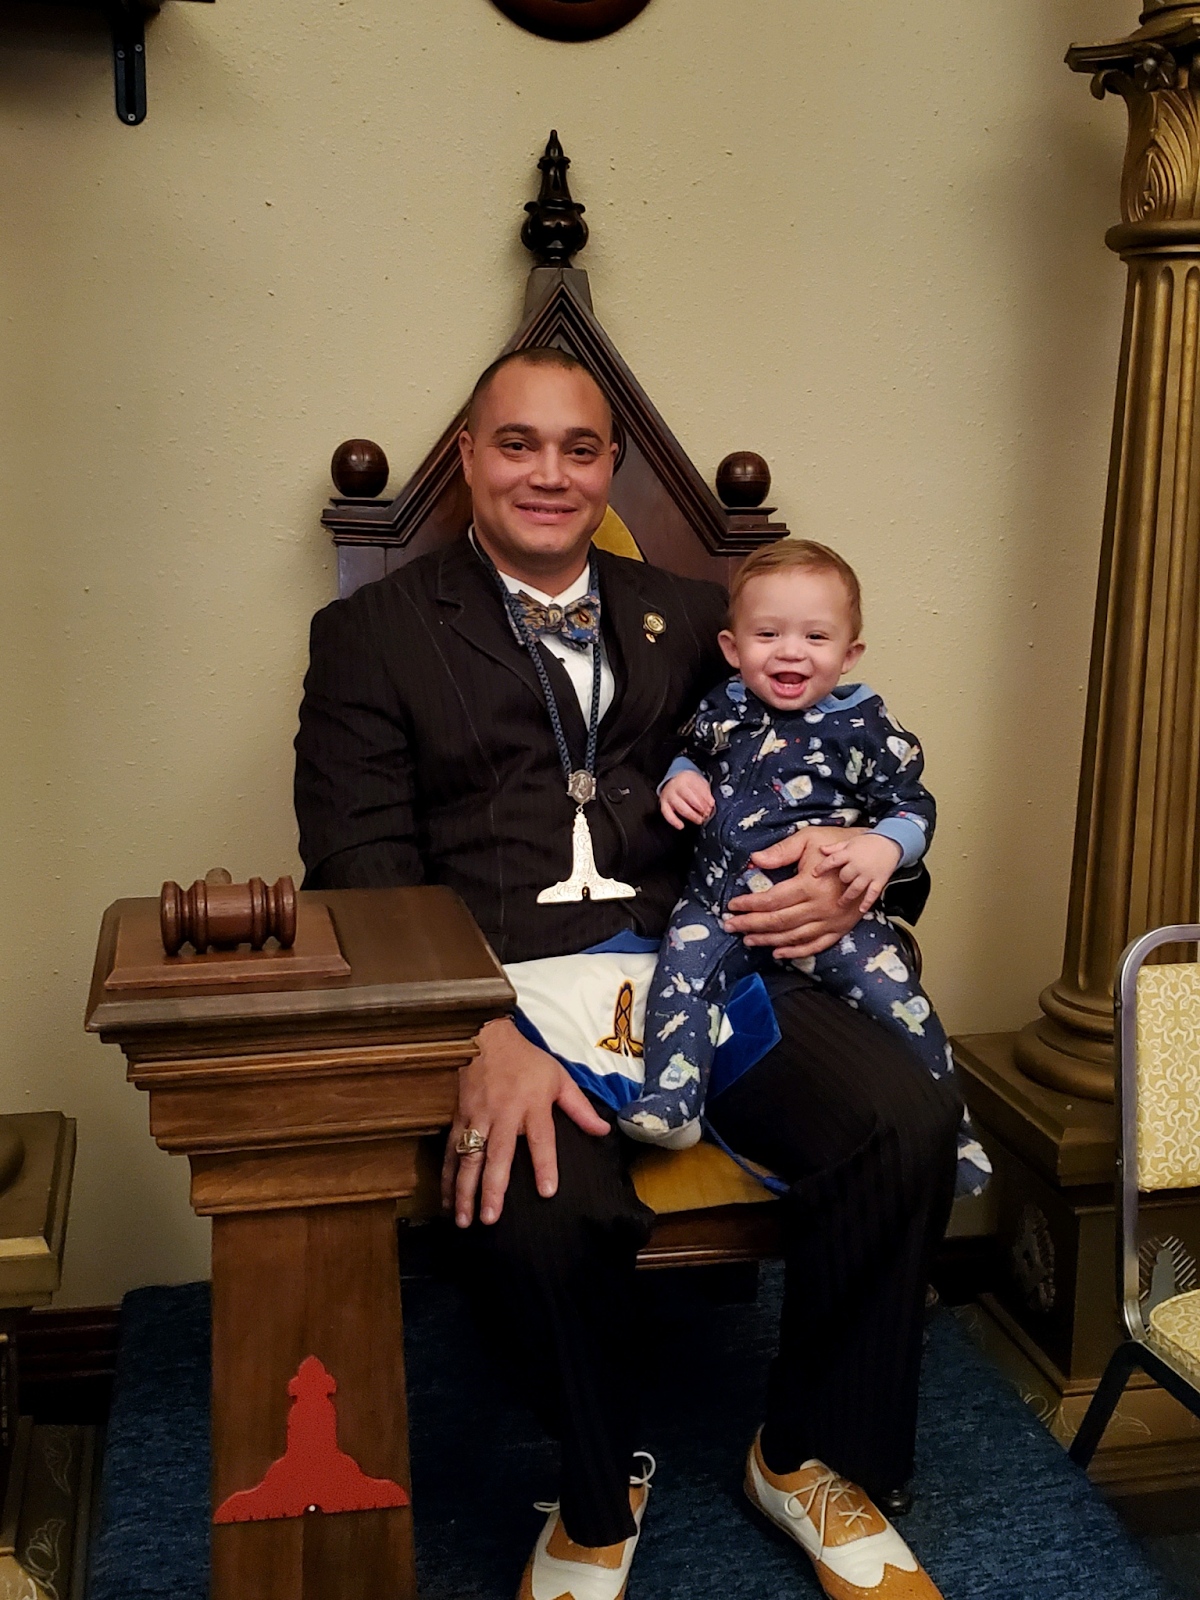 Image of Ohio Mason John Tate with his son at an Officer Installation event at a Masonic lodge.